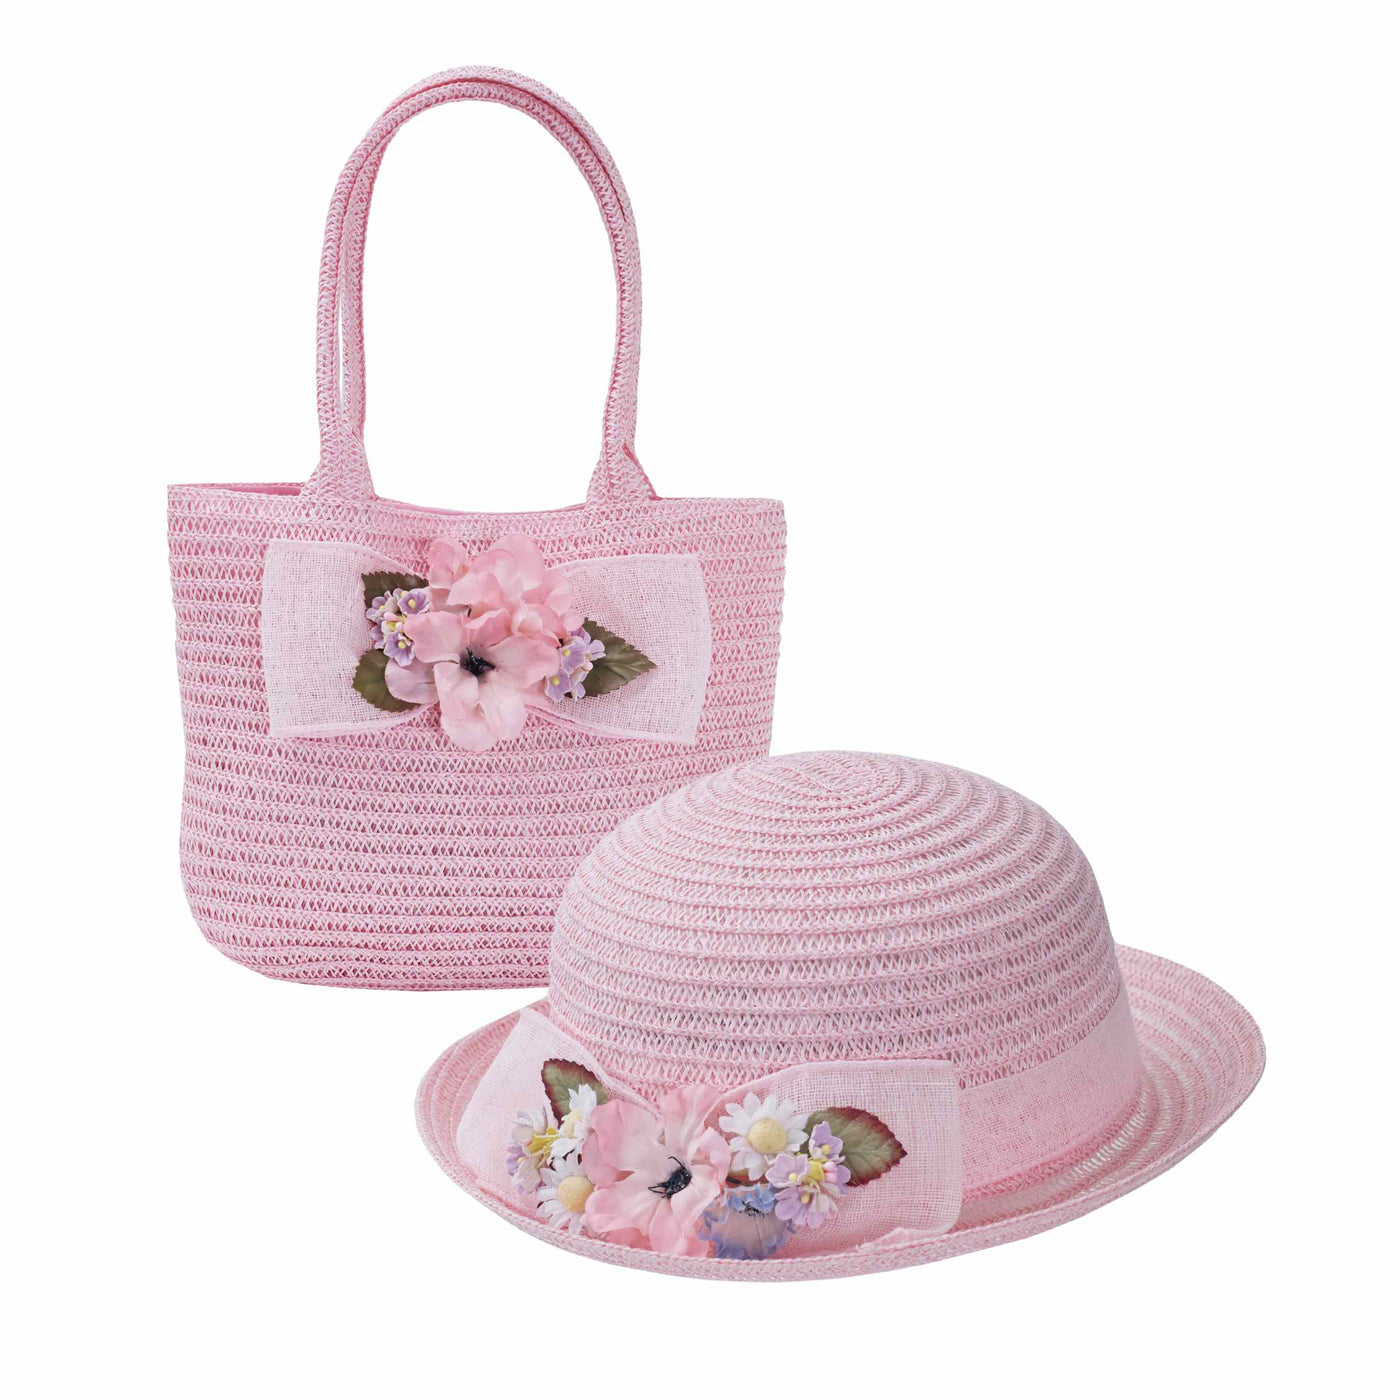 Child's Summer Hat and Purse